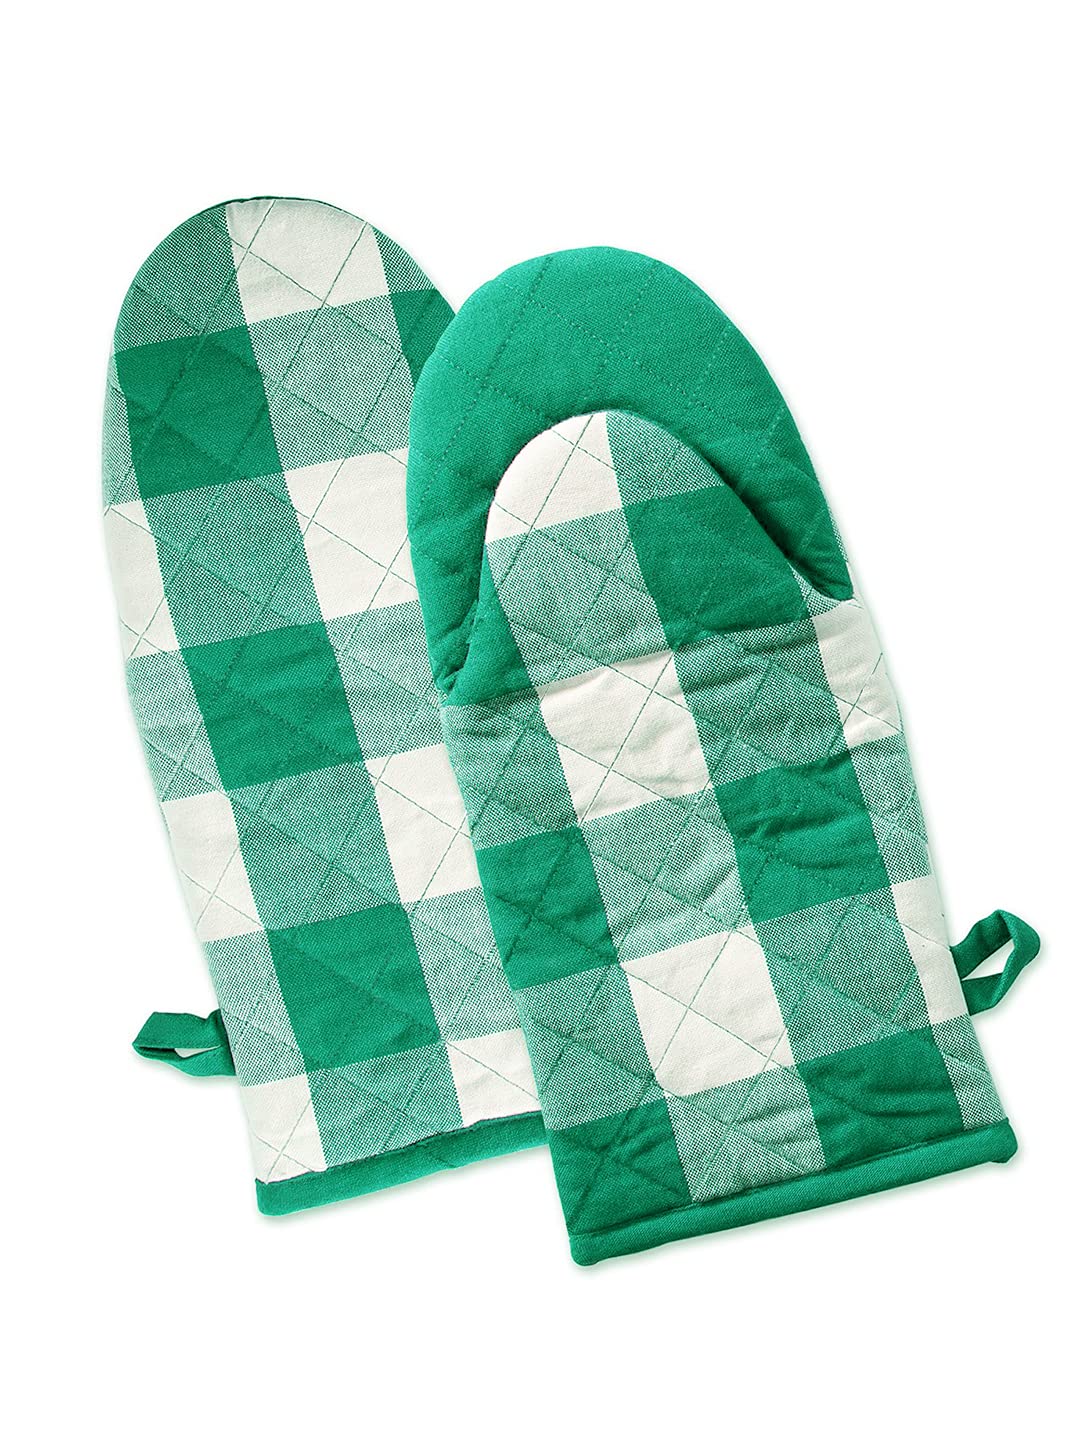 Lushomes oven gloves heat proof, Buffalo Checks microwave gloves Frog Style, oven accessories (Pack of 2, 6 x 13 Inches) (Green)